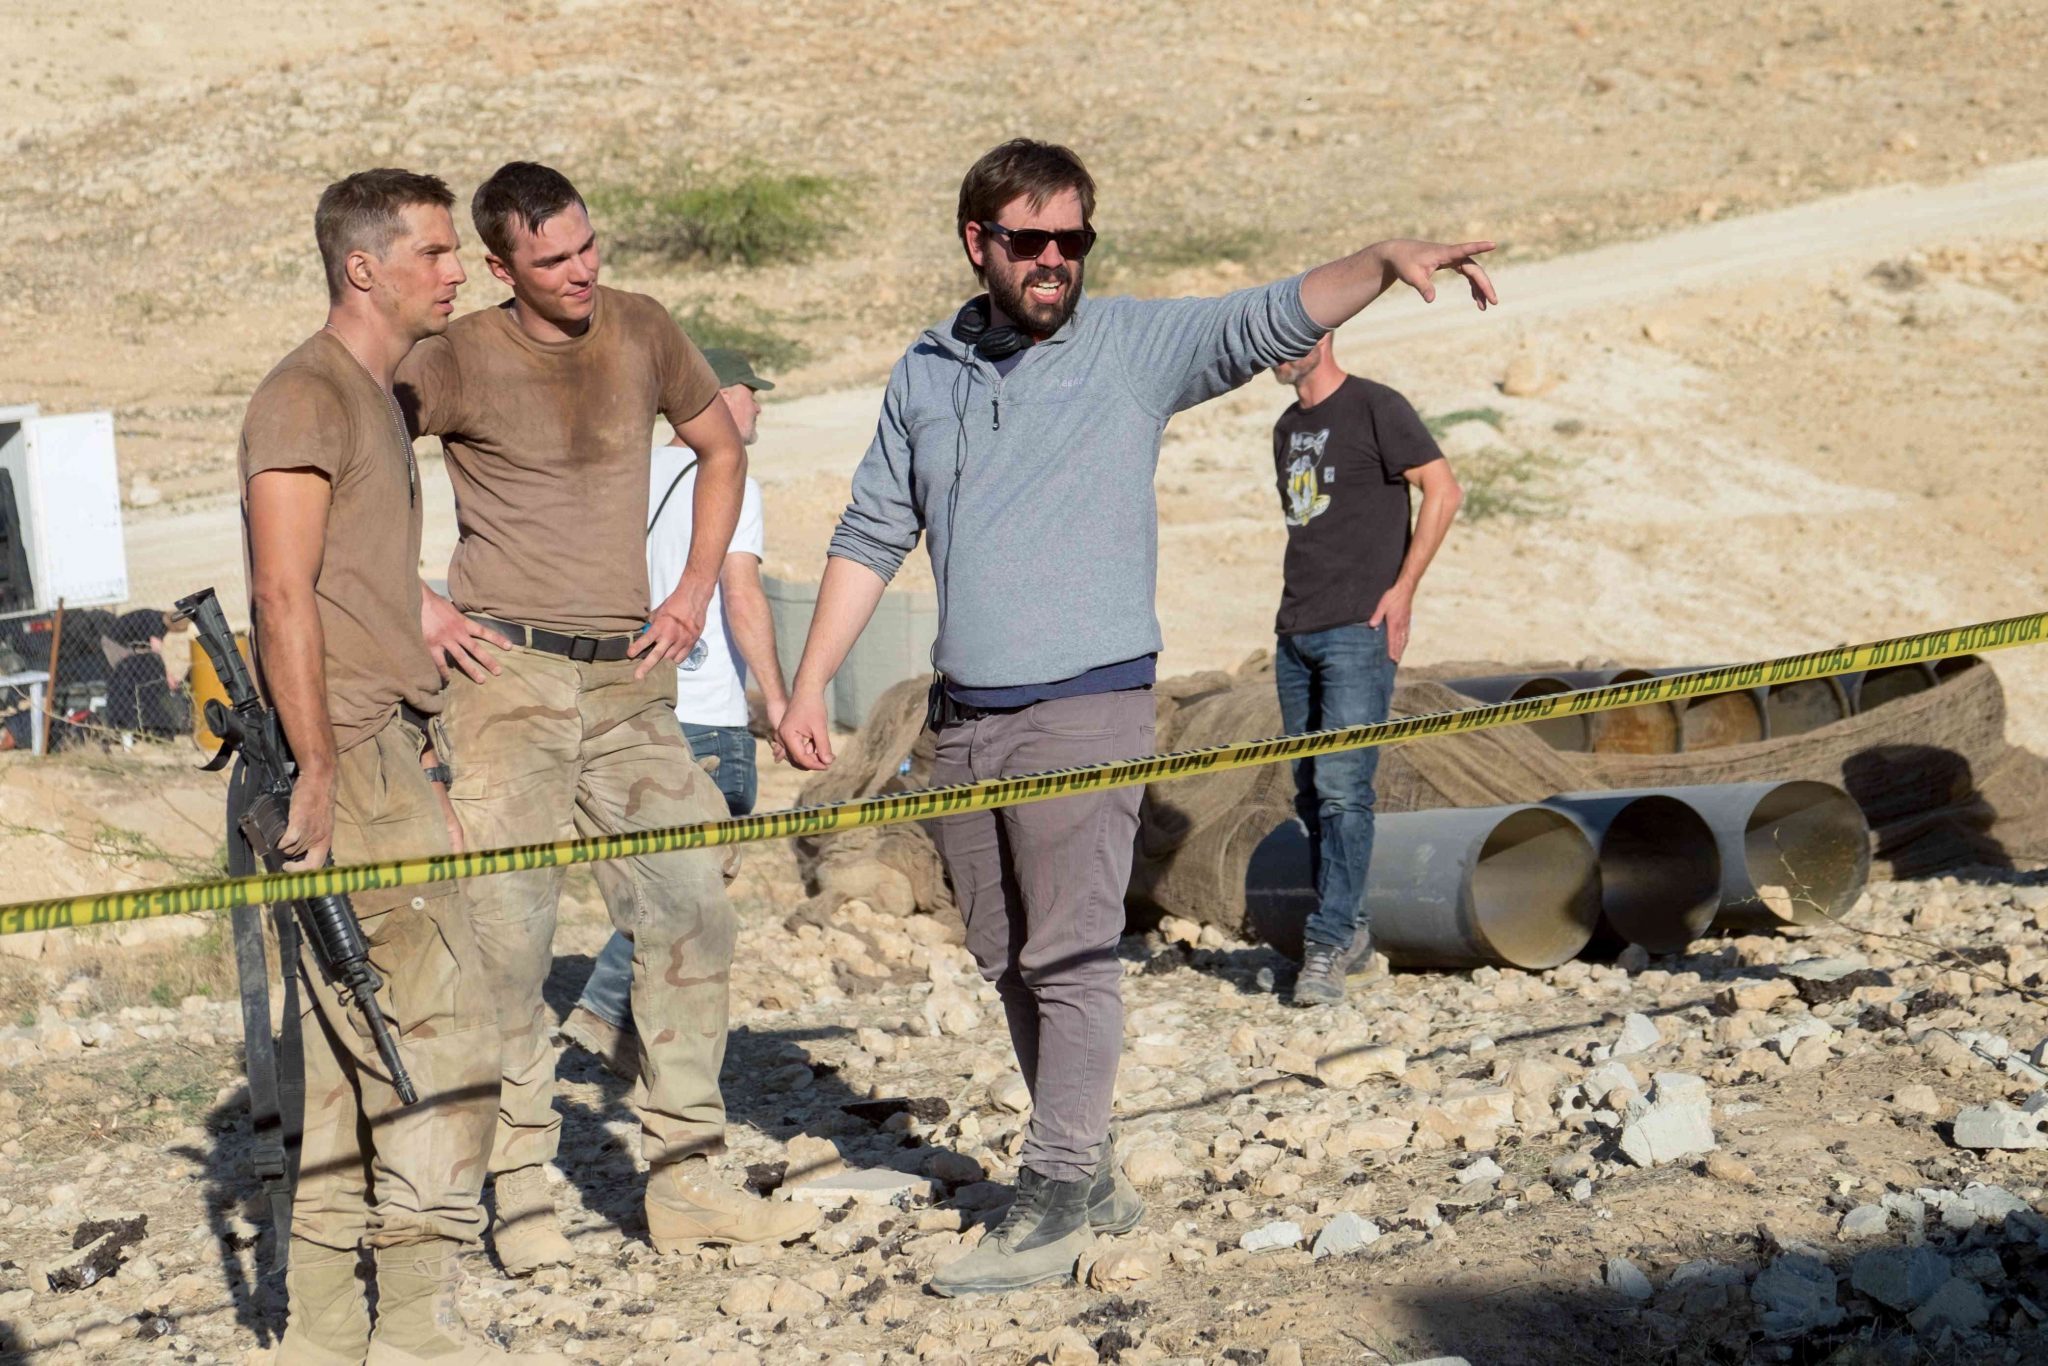 Logan Marshall-Green, Nicholas Hoult, and Fernando Coimbra behind the scenes on the set of Netflix Original Film Sand Castle (2017). Photo courtesy of Nick Wall/Netflix. Copyright Nick Wall Photography.